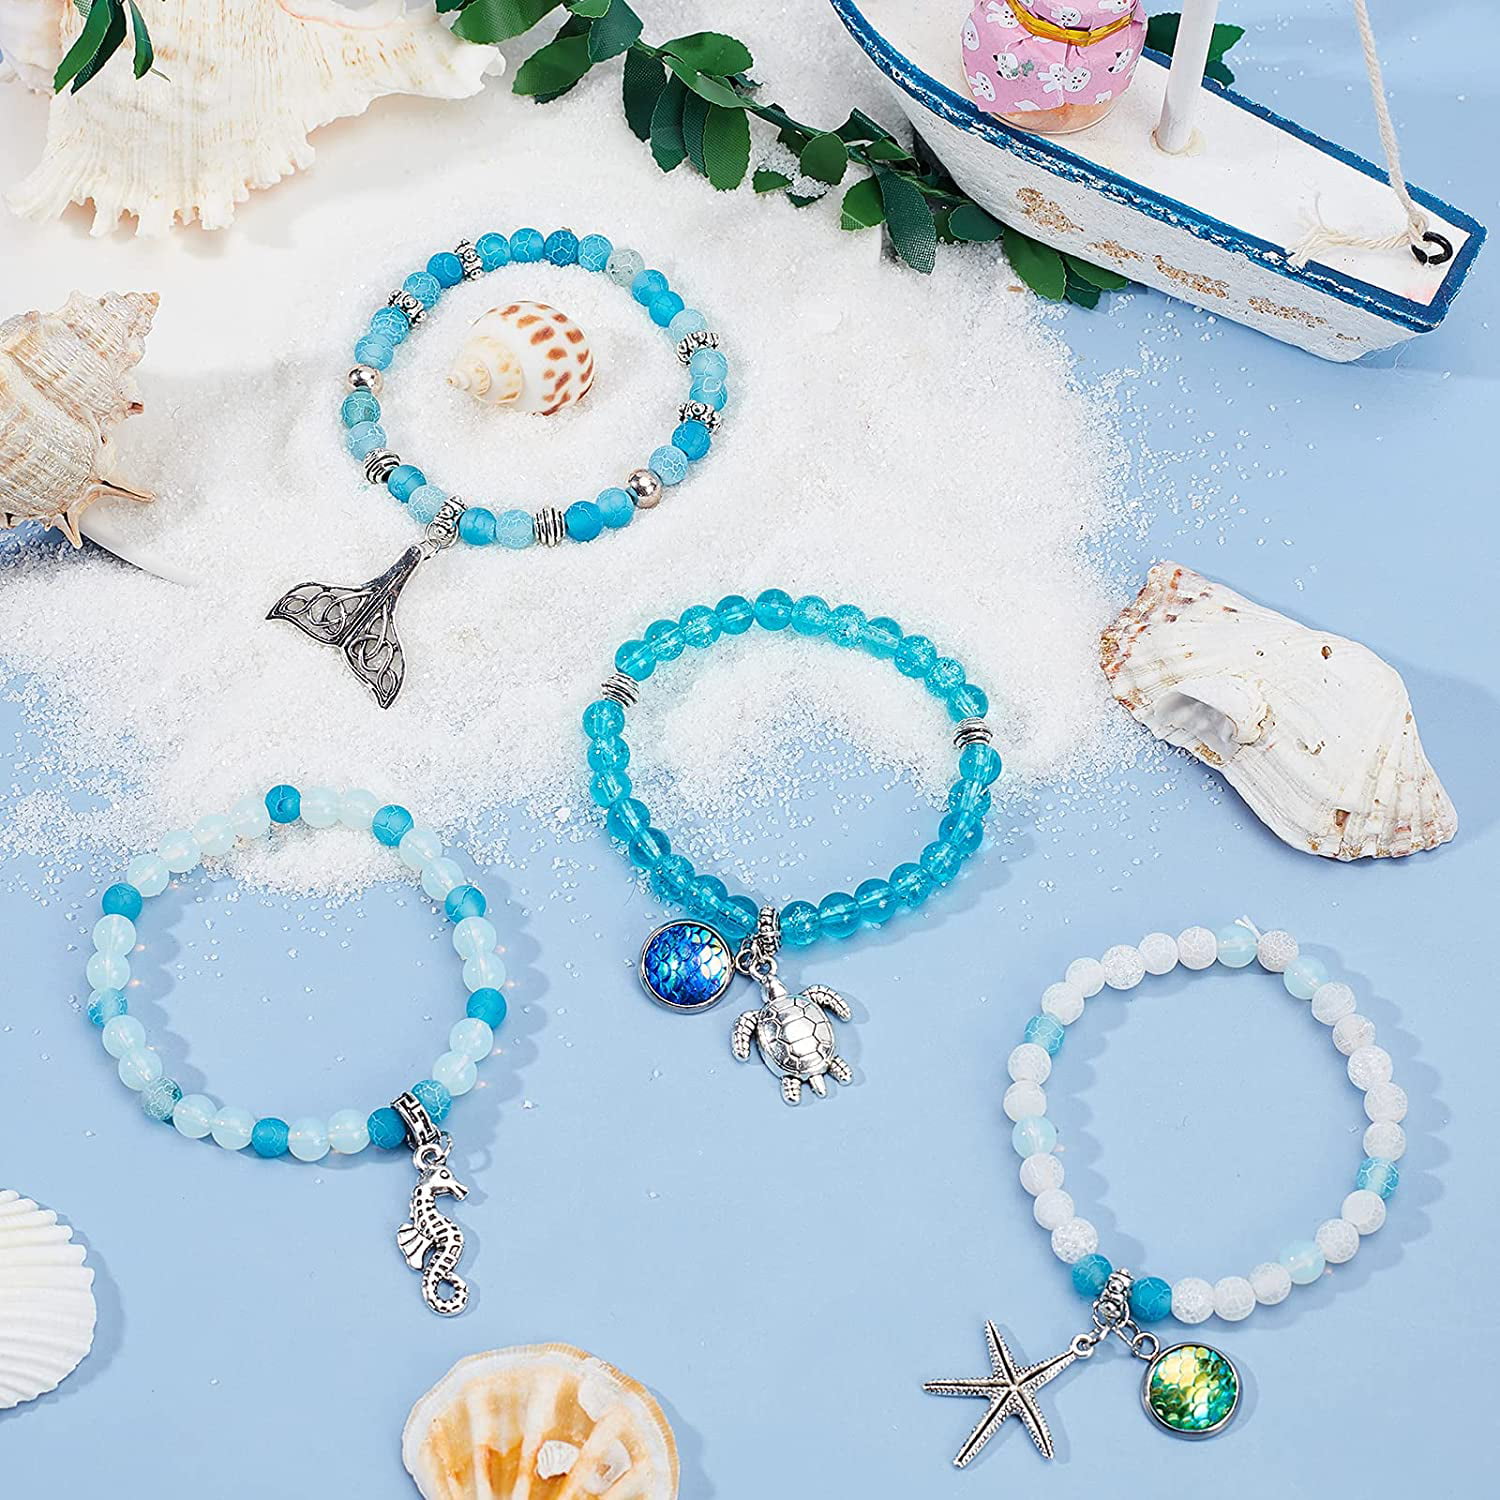 Bracelet Kit - By the Sea – The Happy Planner